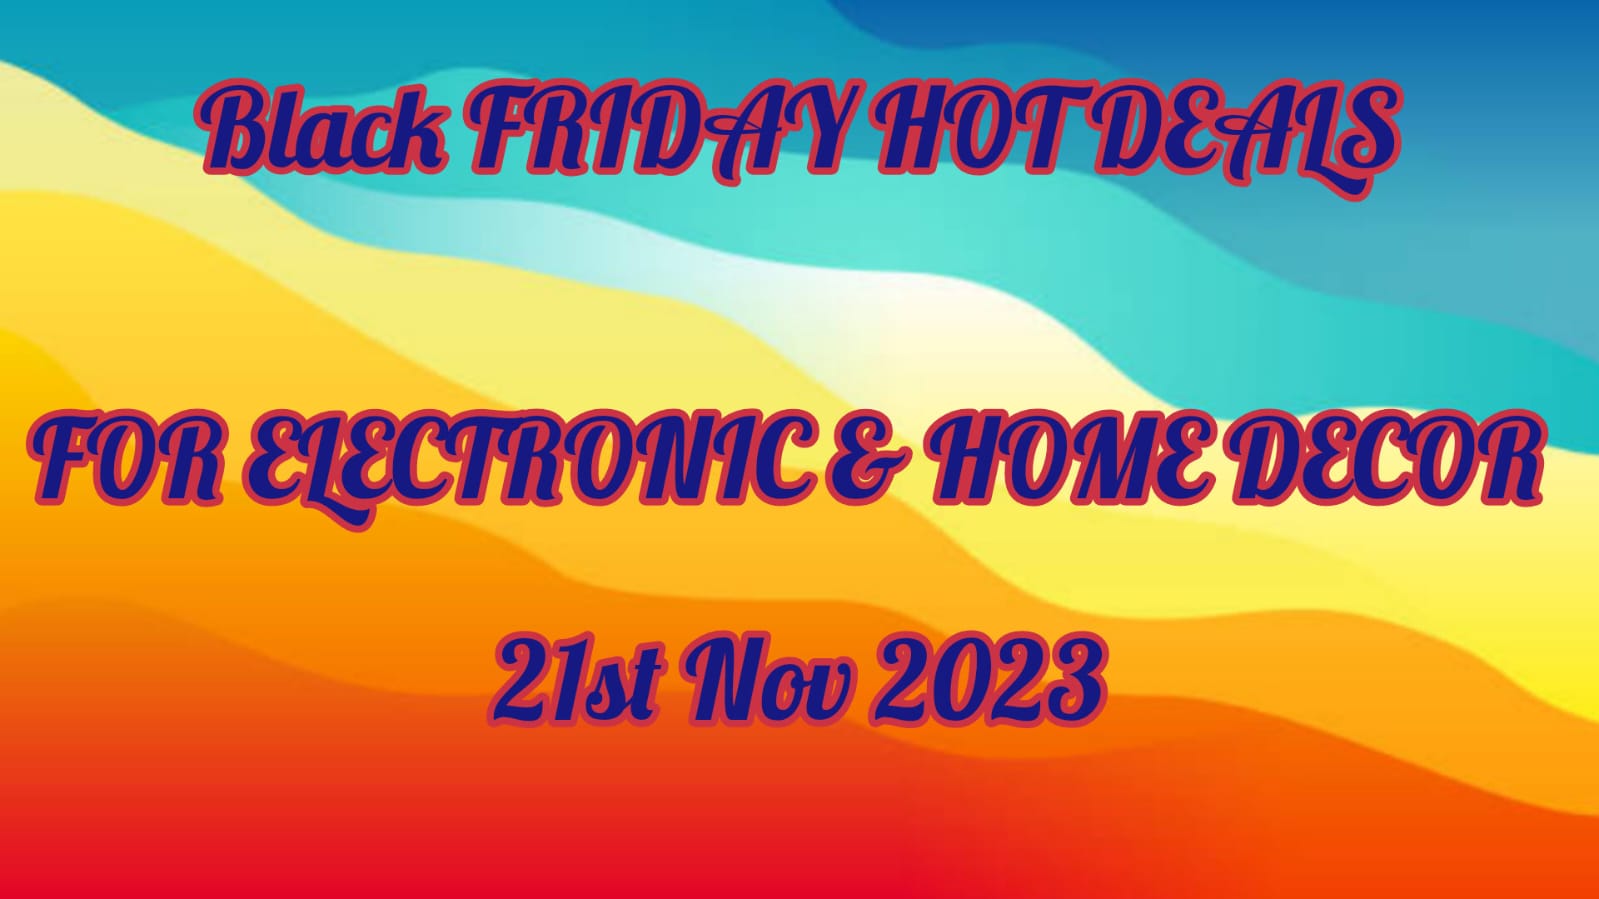 BLACK FRIDAY EARLY DEALS FOR ELECTRONIC, HOME DECOR